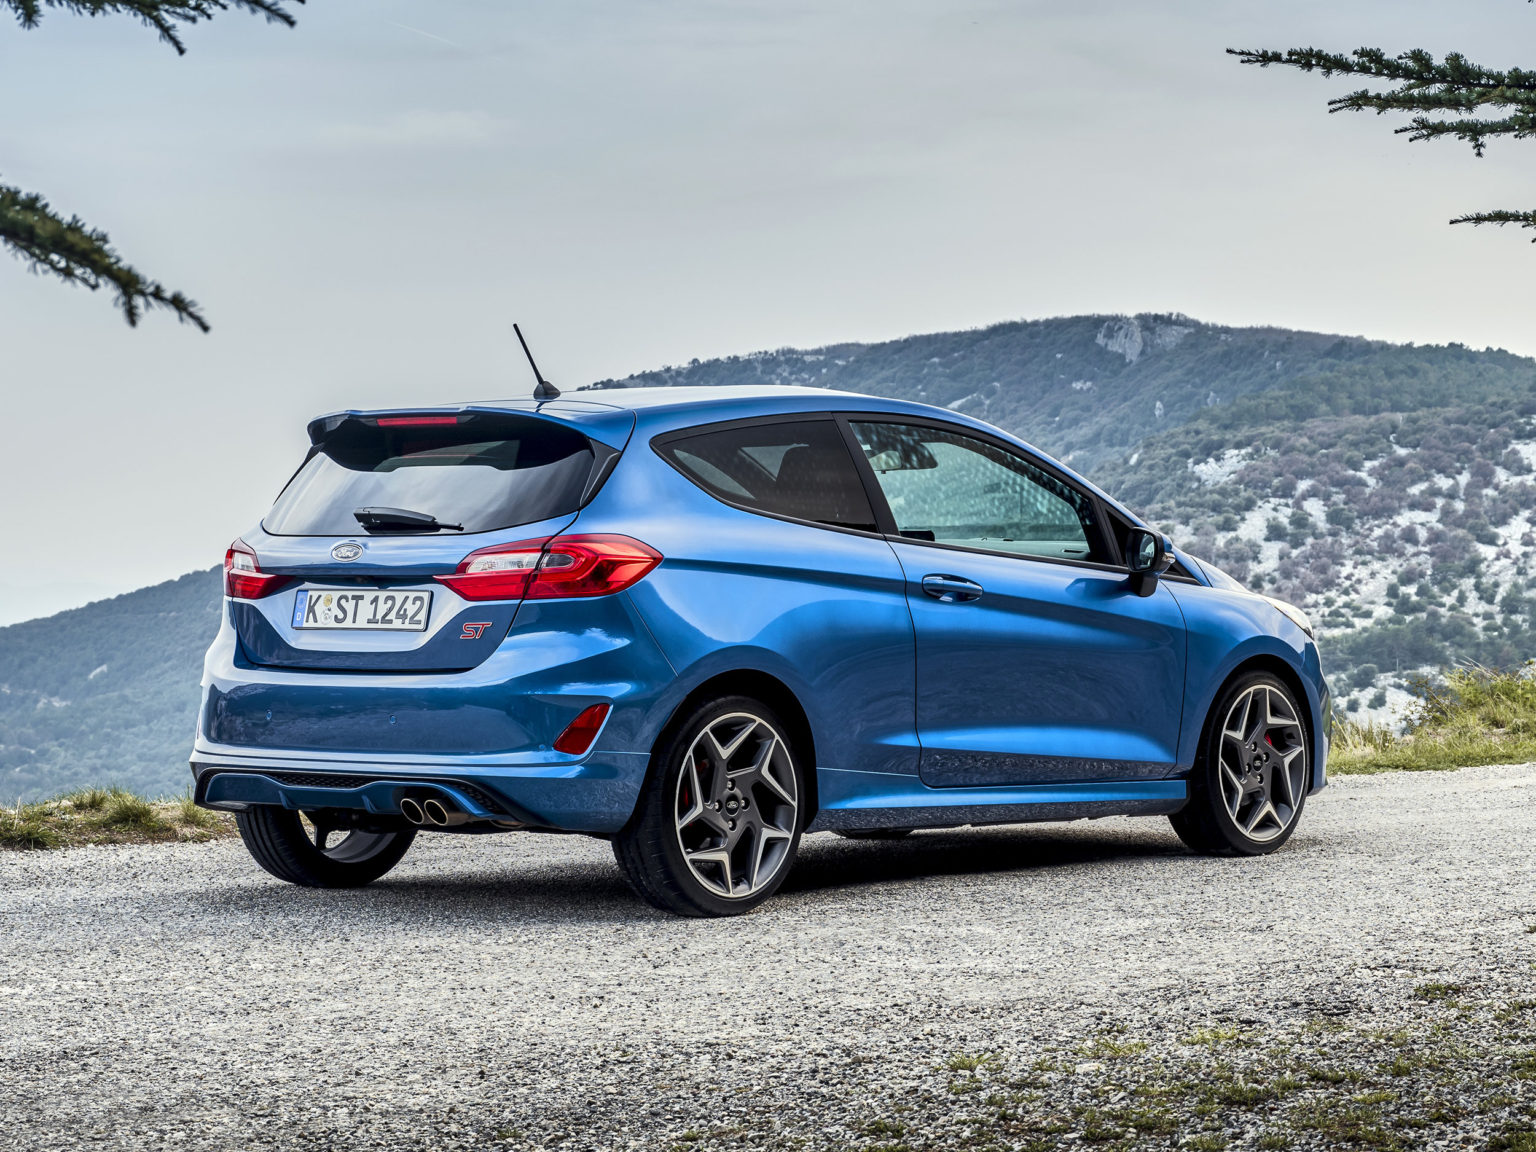 The Ford Fiesta ST is a hot hatch that many Americans wish would be sold stateside.